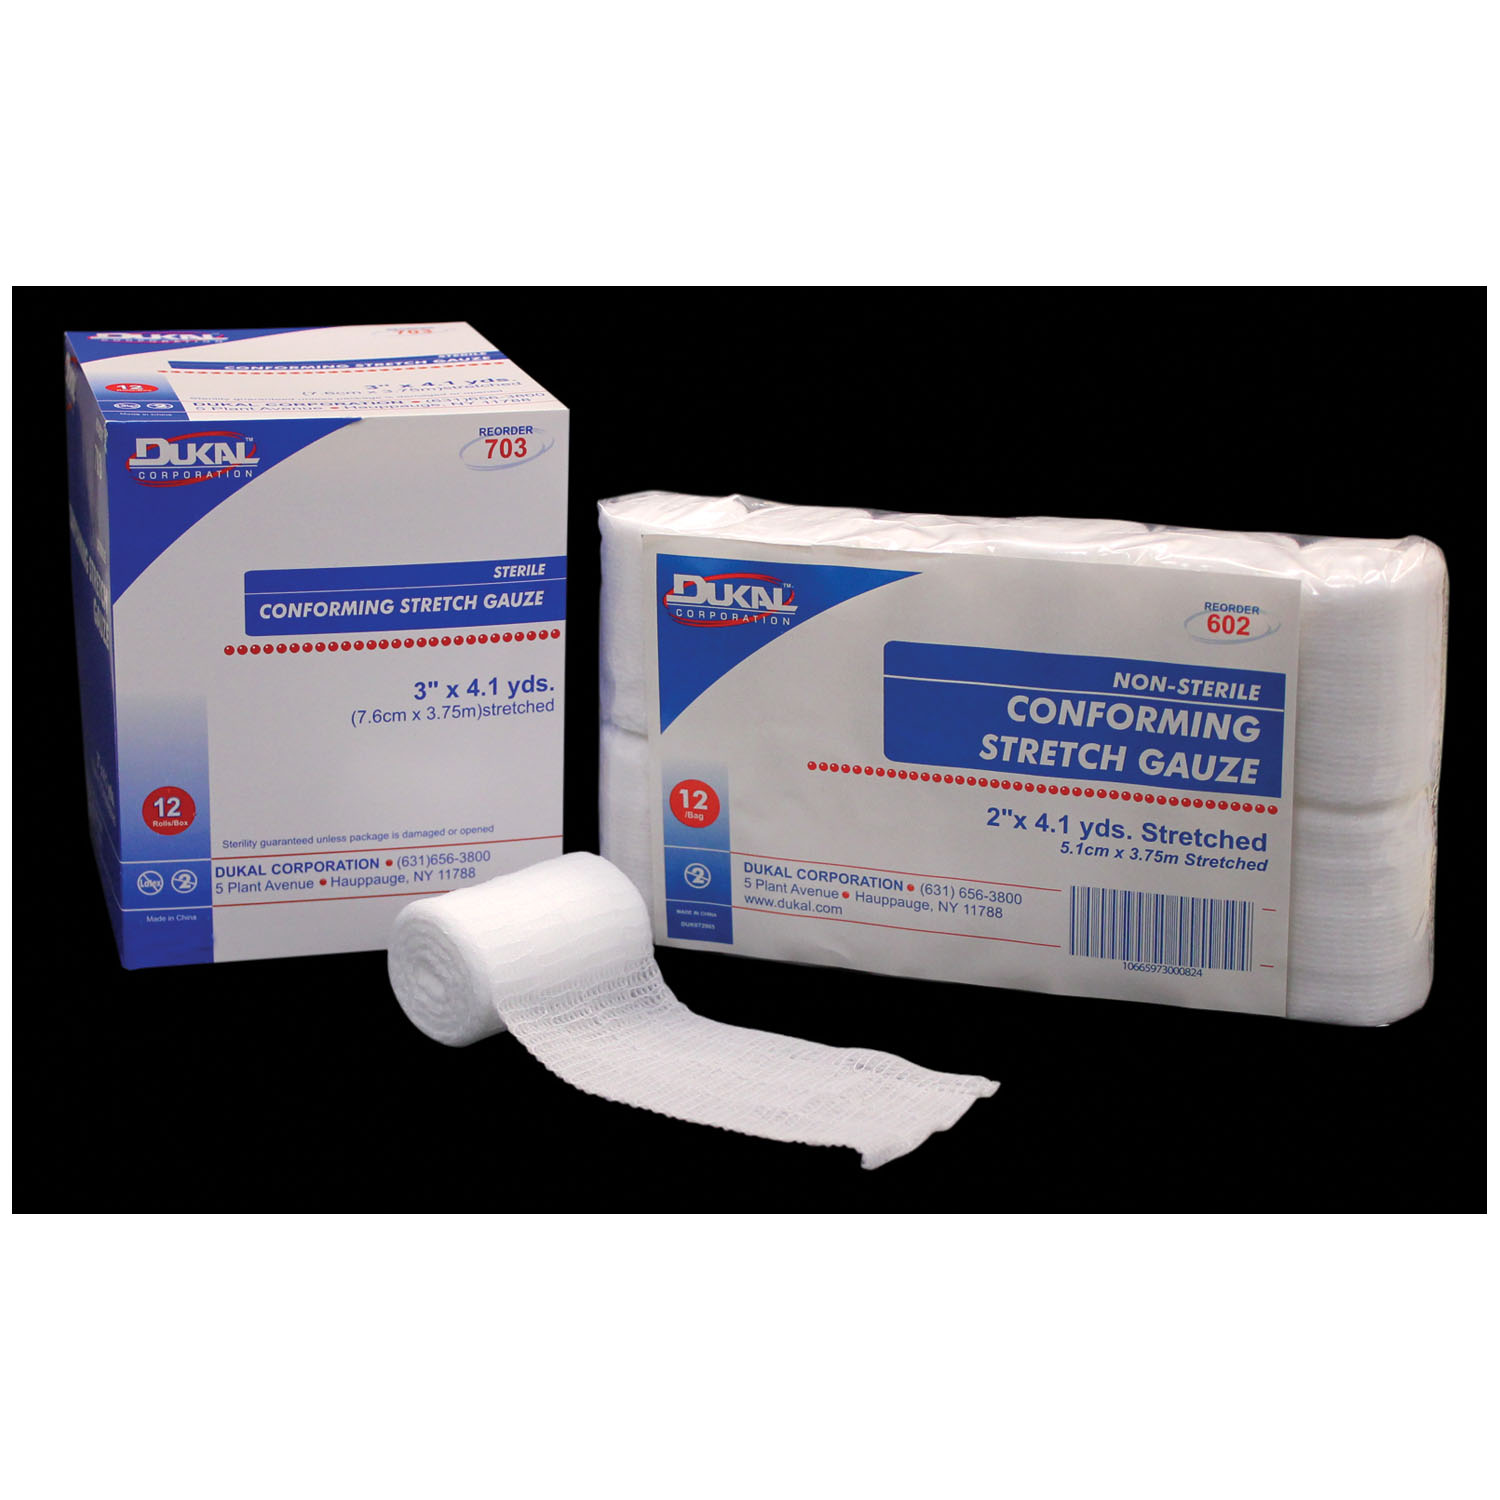 DUKAL CONFORMING STRETCH GAUZE : 706 BX $7.25 Stocked